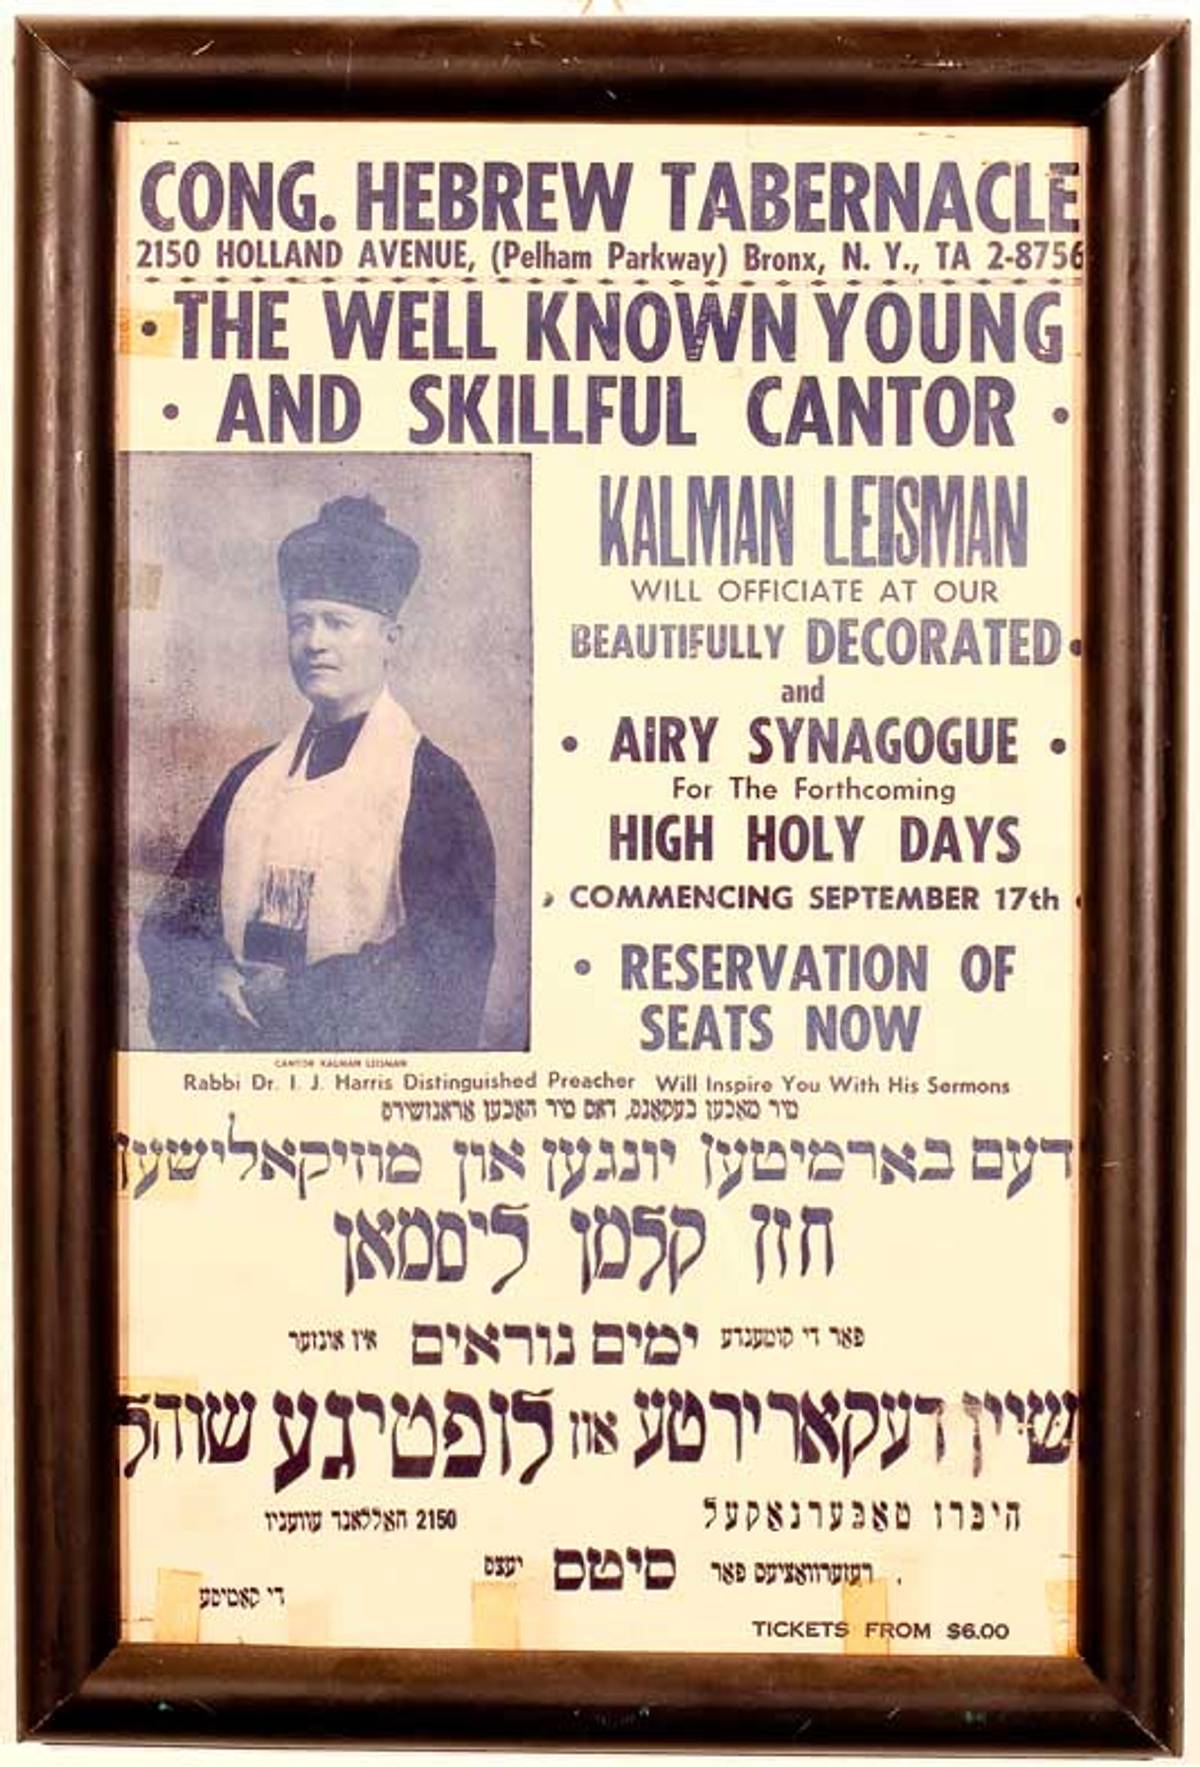 ‘High Holy Day Cantor’, Congregation Hebrew Tabernacle, Bronx, New York. (Photo courtesy of Michael Strassfeld)